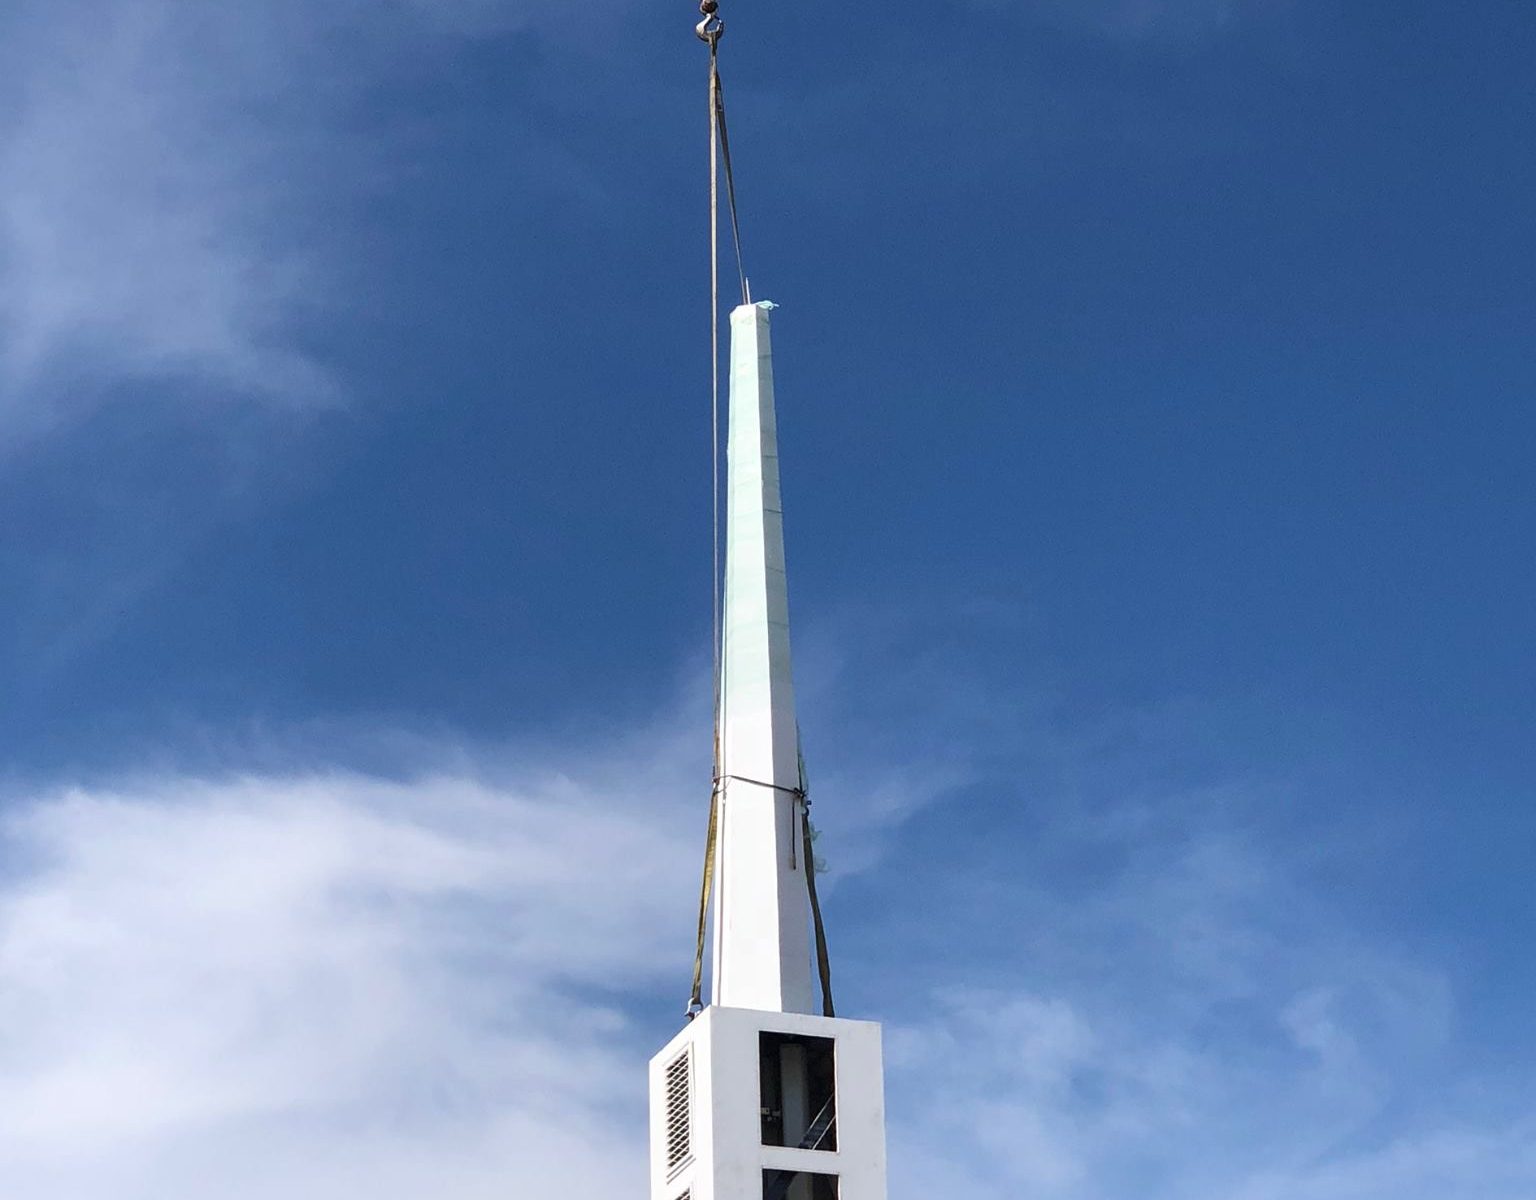 church steeple re-design and fabrication project to conceal a cell tower